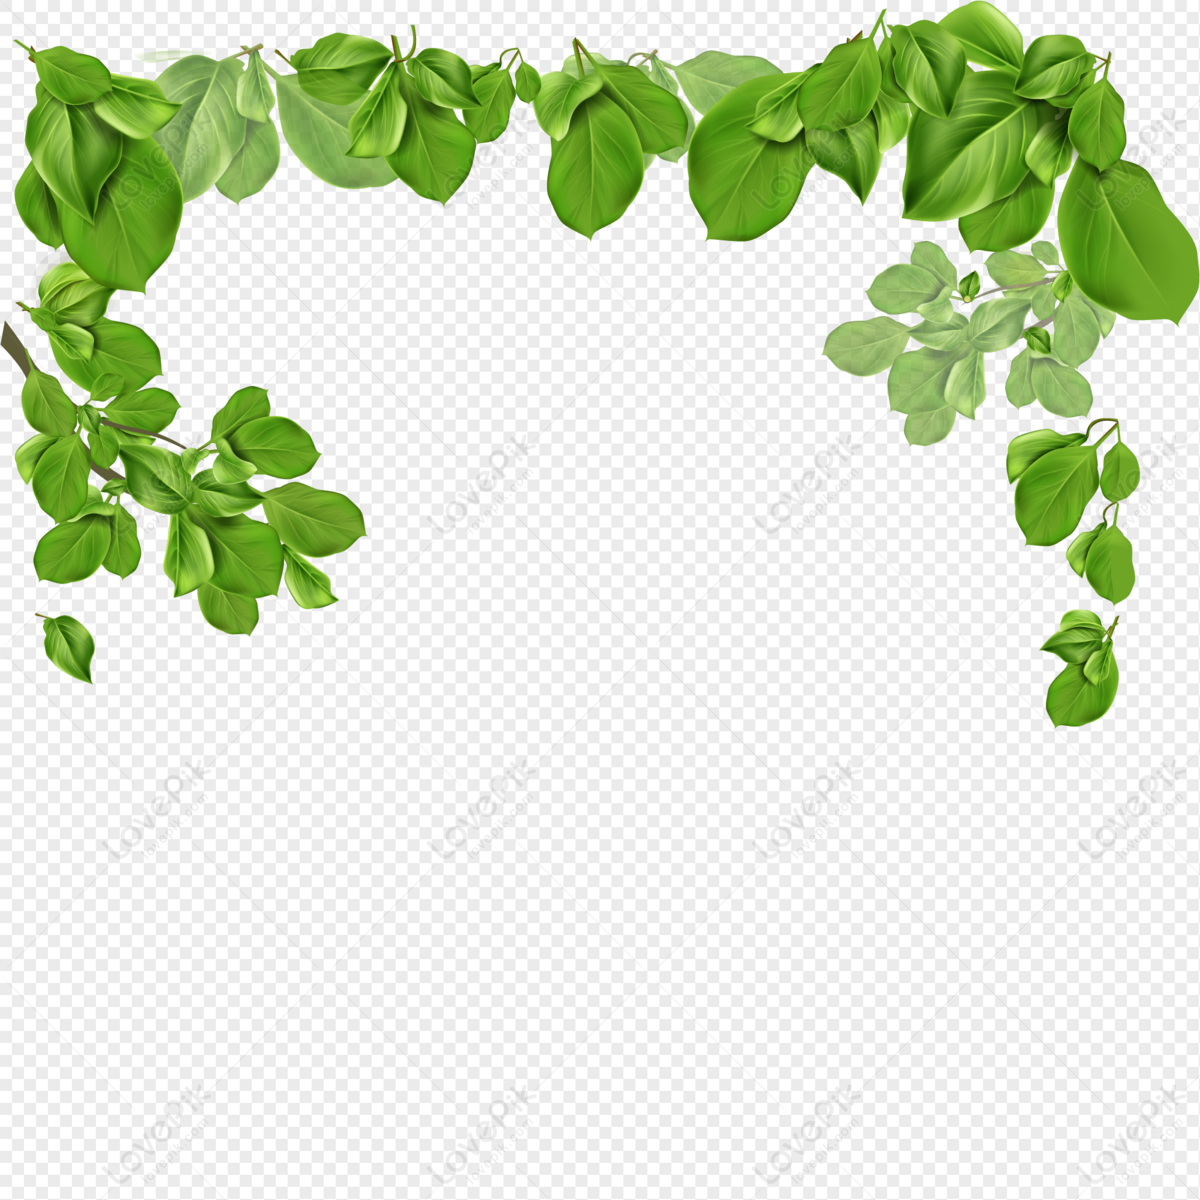 Vector Green Leaves Border Png Transparent Image And Clipart Image For Free  Download - Lovepik | 401453857